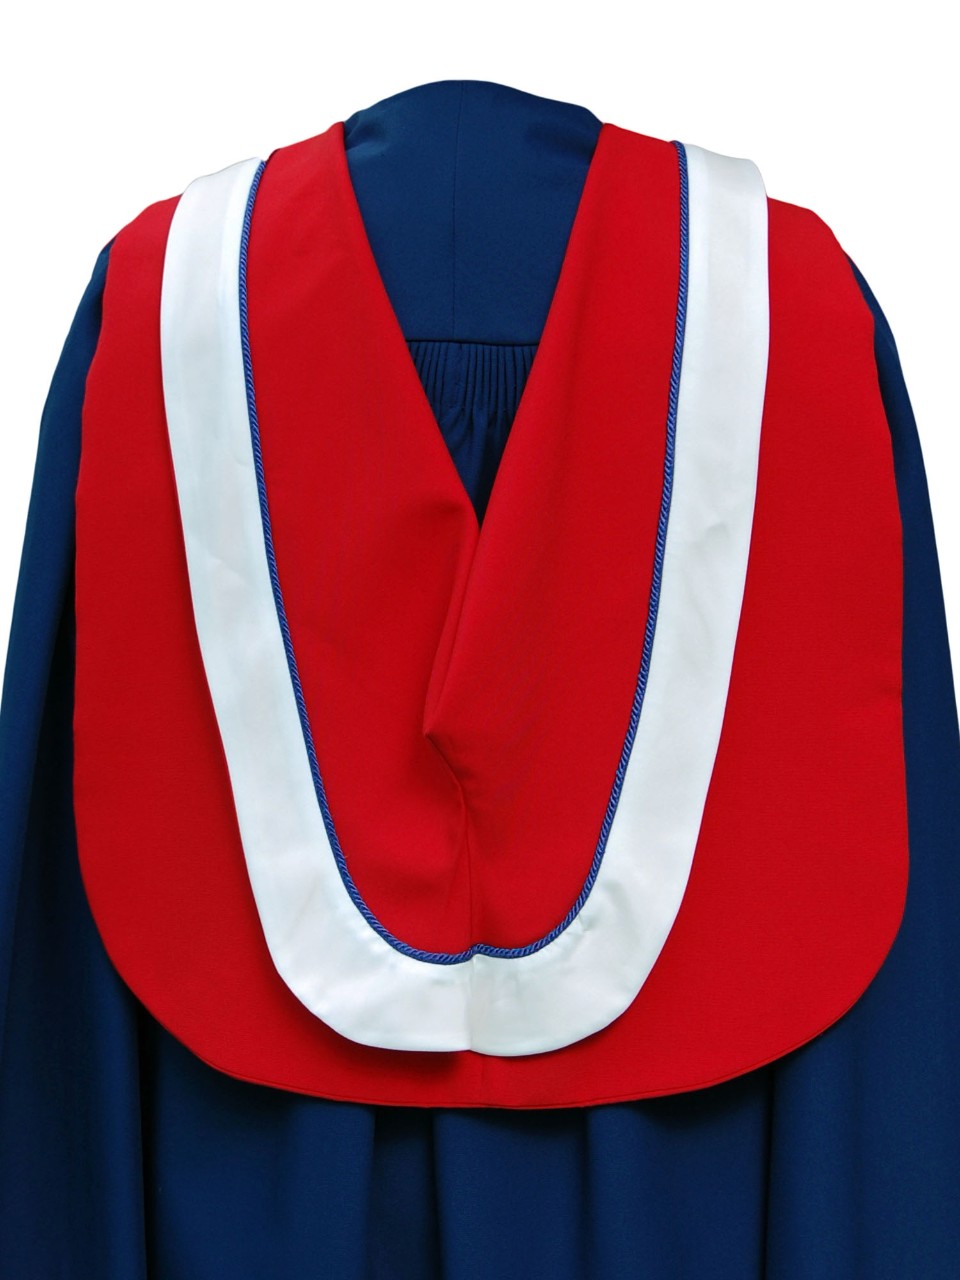 The Master of Education hood is wide white border and royal blue cording